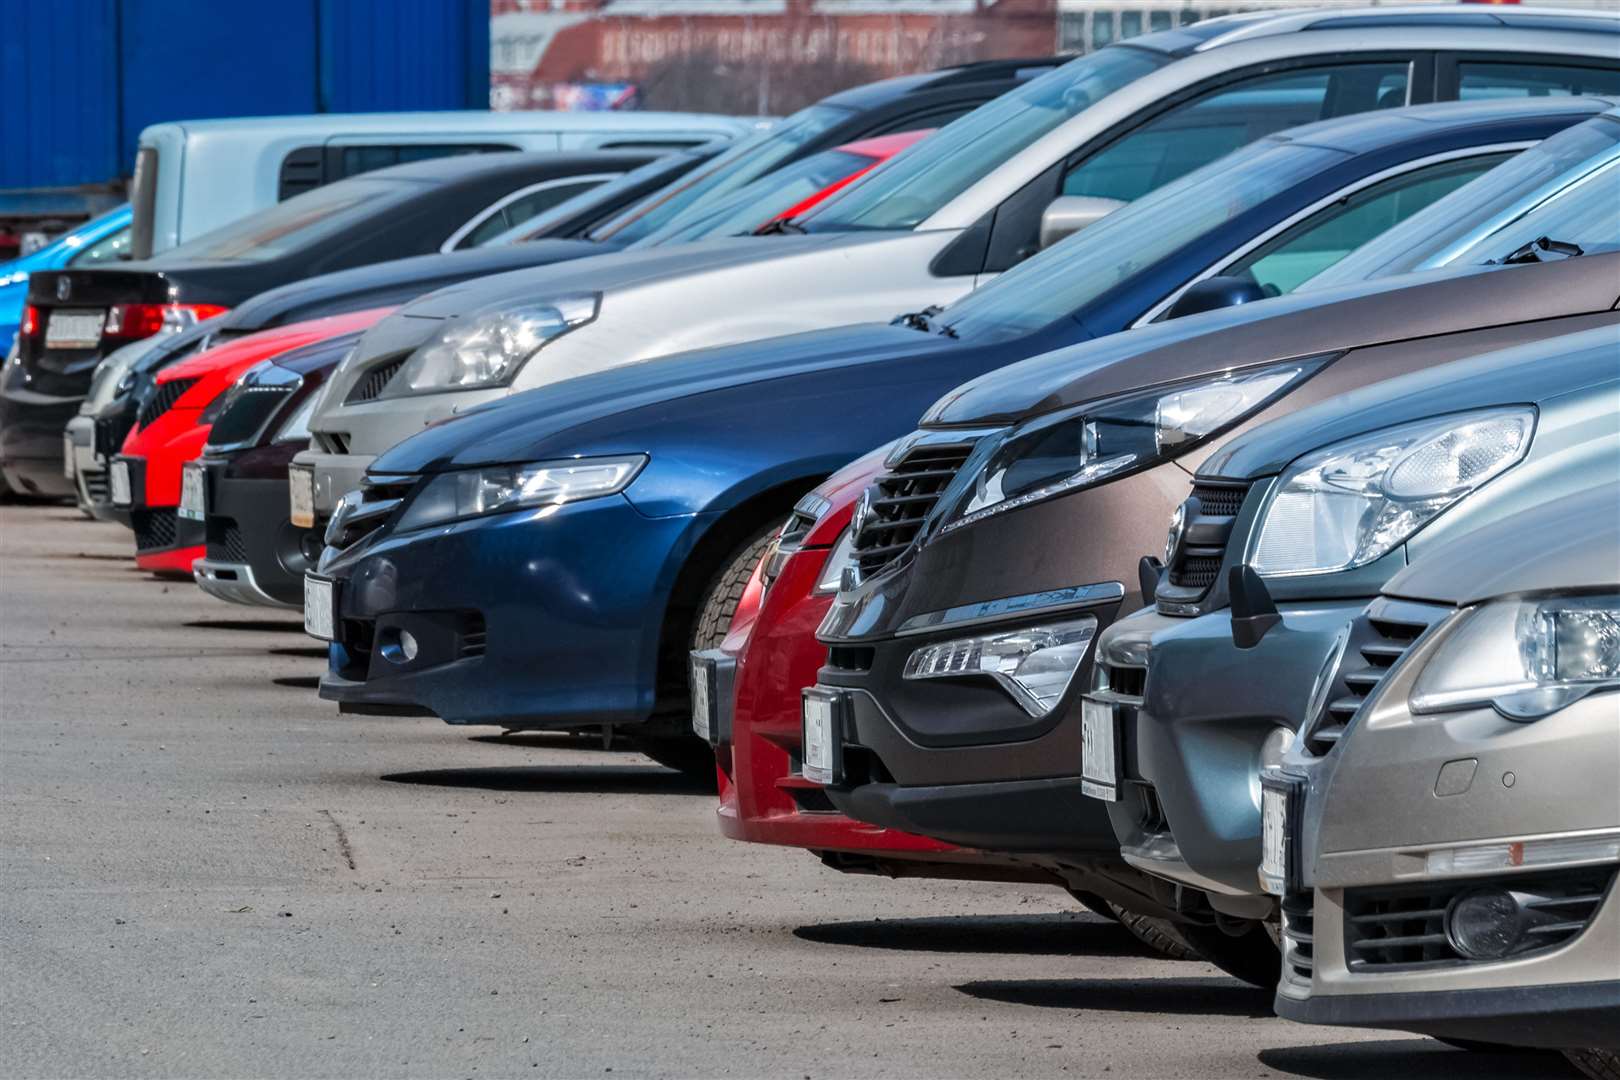 Money Saving Expert insurance officials say any modifications to a car should be run past your insurer first. Image: iStock image.